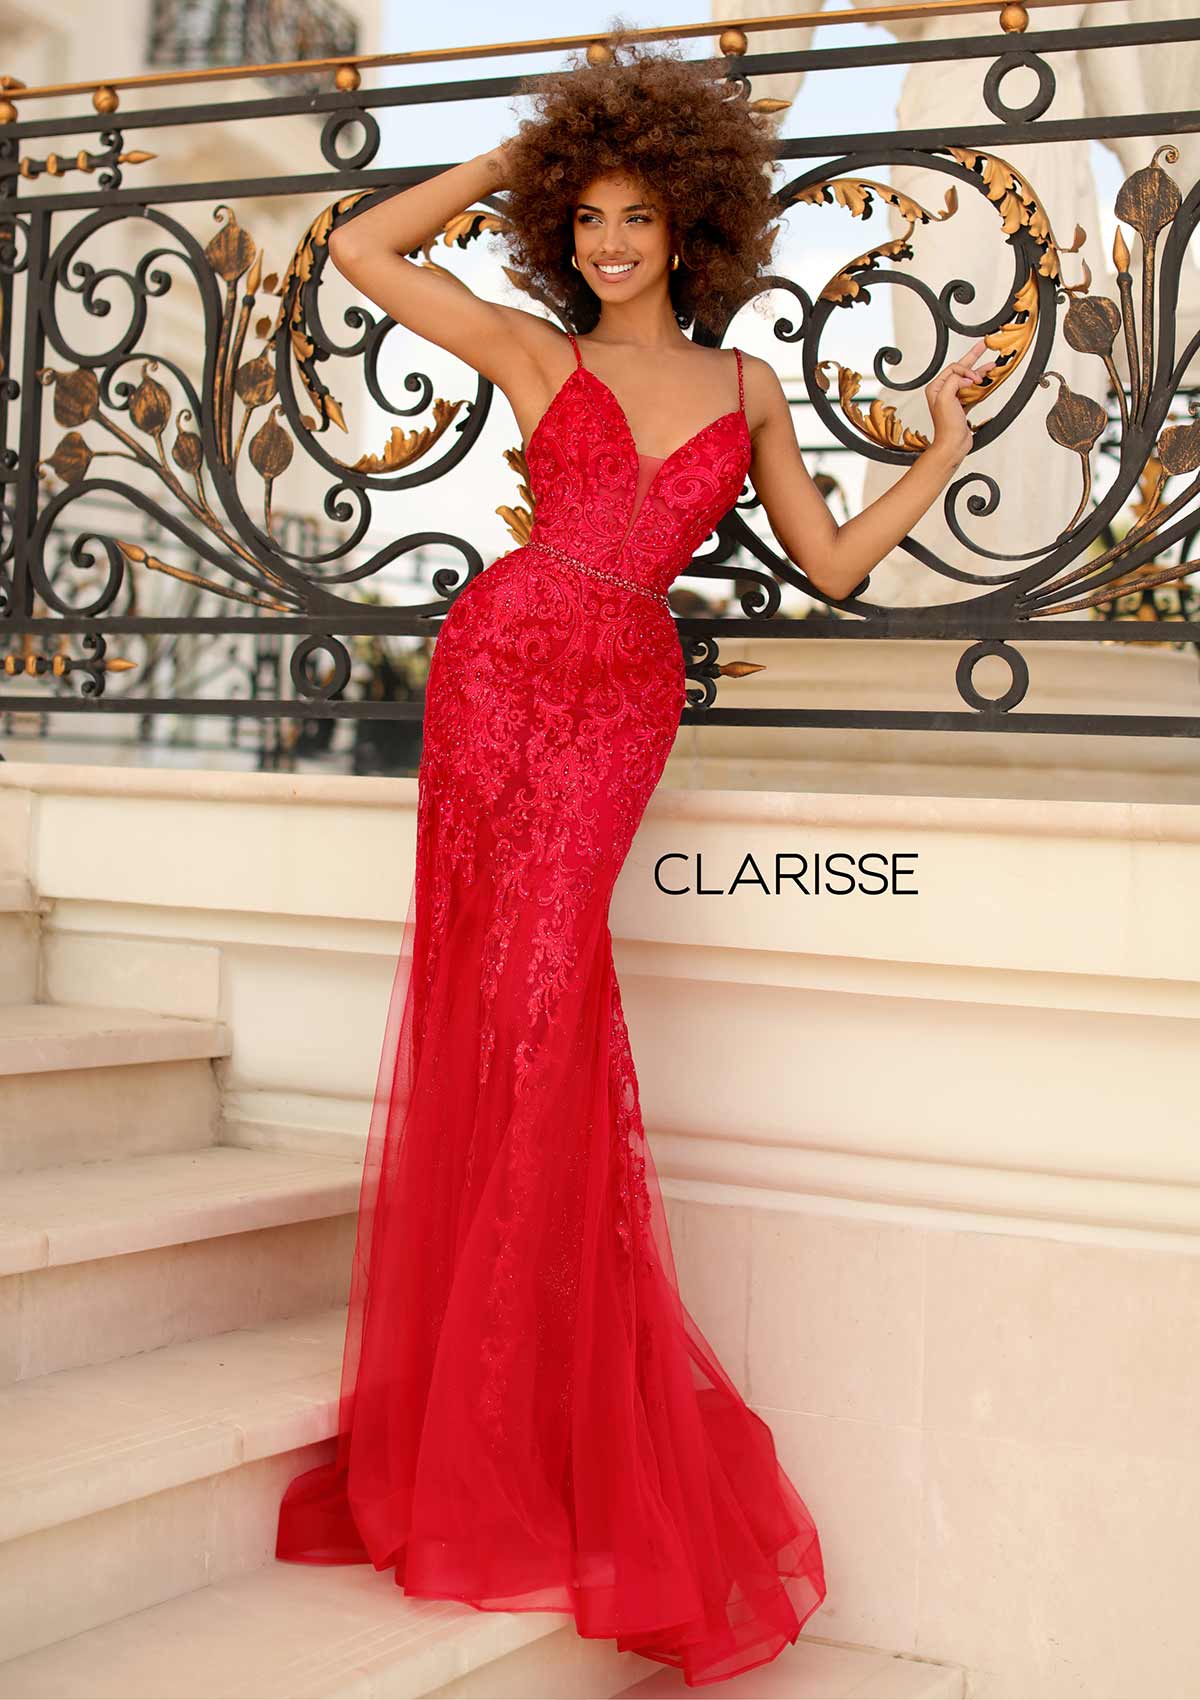 Clarisse - 810403 - All Dressed Up, Prom/Party Dress - 0 - Dresses Two Piece Cut Out Sweetheart Halter Low Back High Neck Print Beaded Chiffon Jersey Fitted Sexy Satin Lace Jeweled Sparkle Shimmer Sleeveless Stunning Gorgeous Modest See Through Transparent Glitter Special Occasions Event Chattanooga Hixson Shops Boutiques Tennessee TN Georgia GA MSRP Lowest Prices Sale Discount